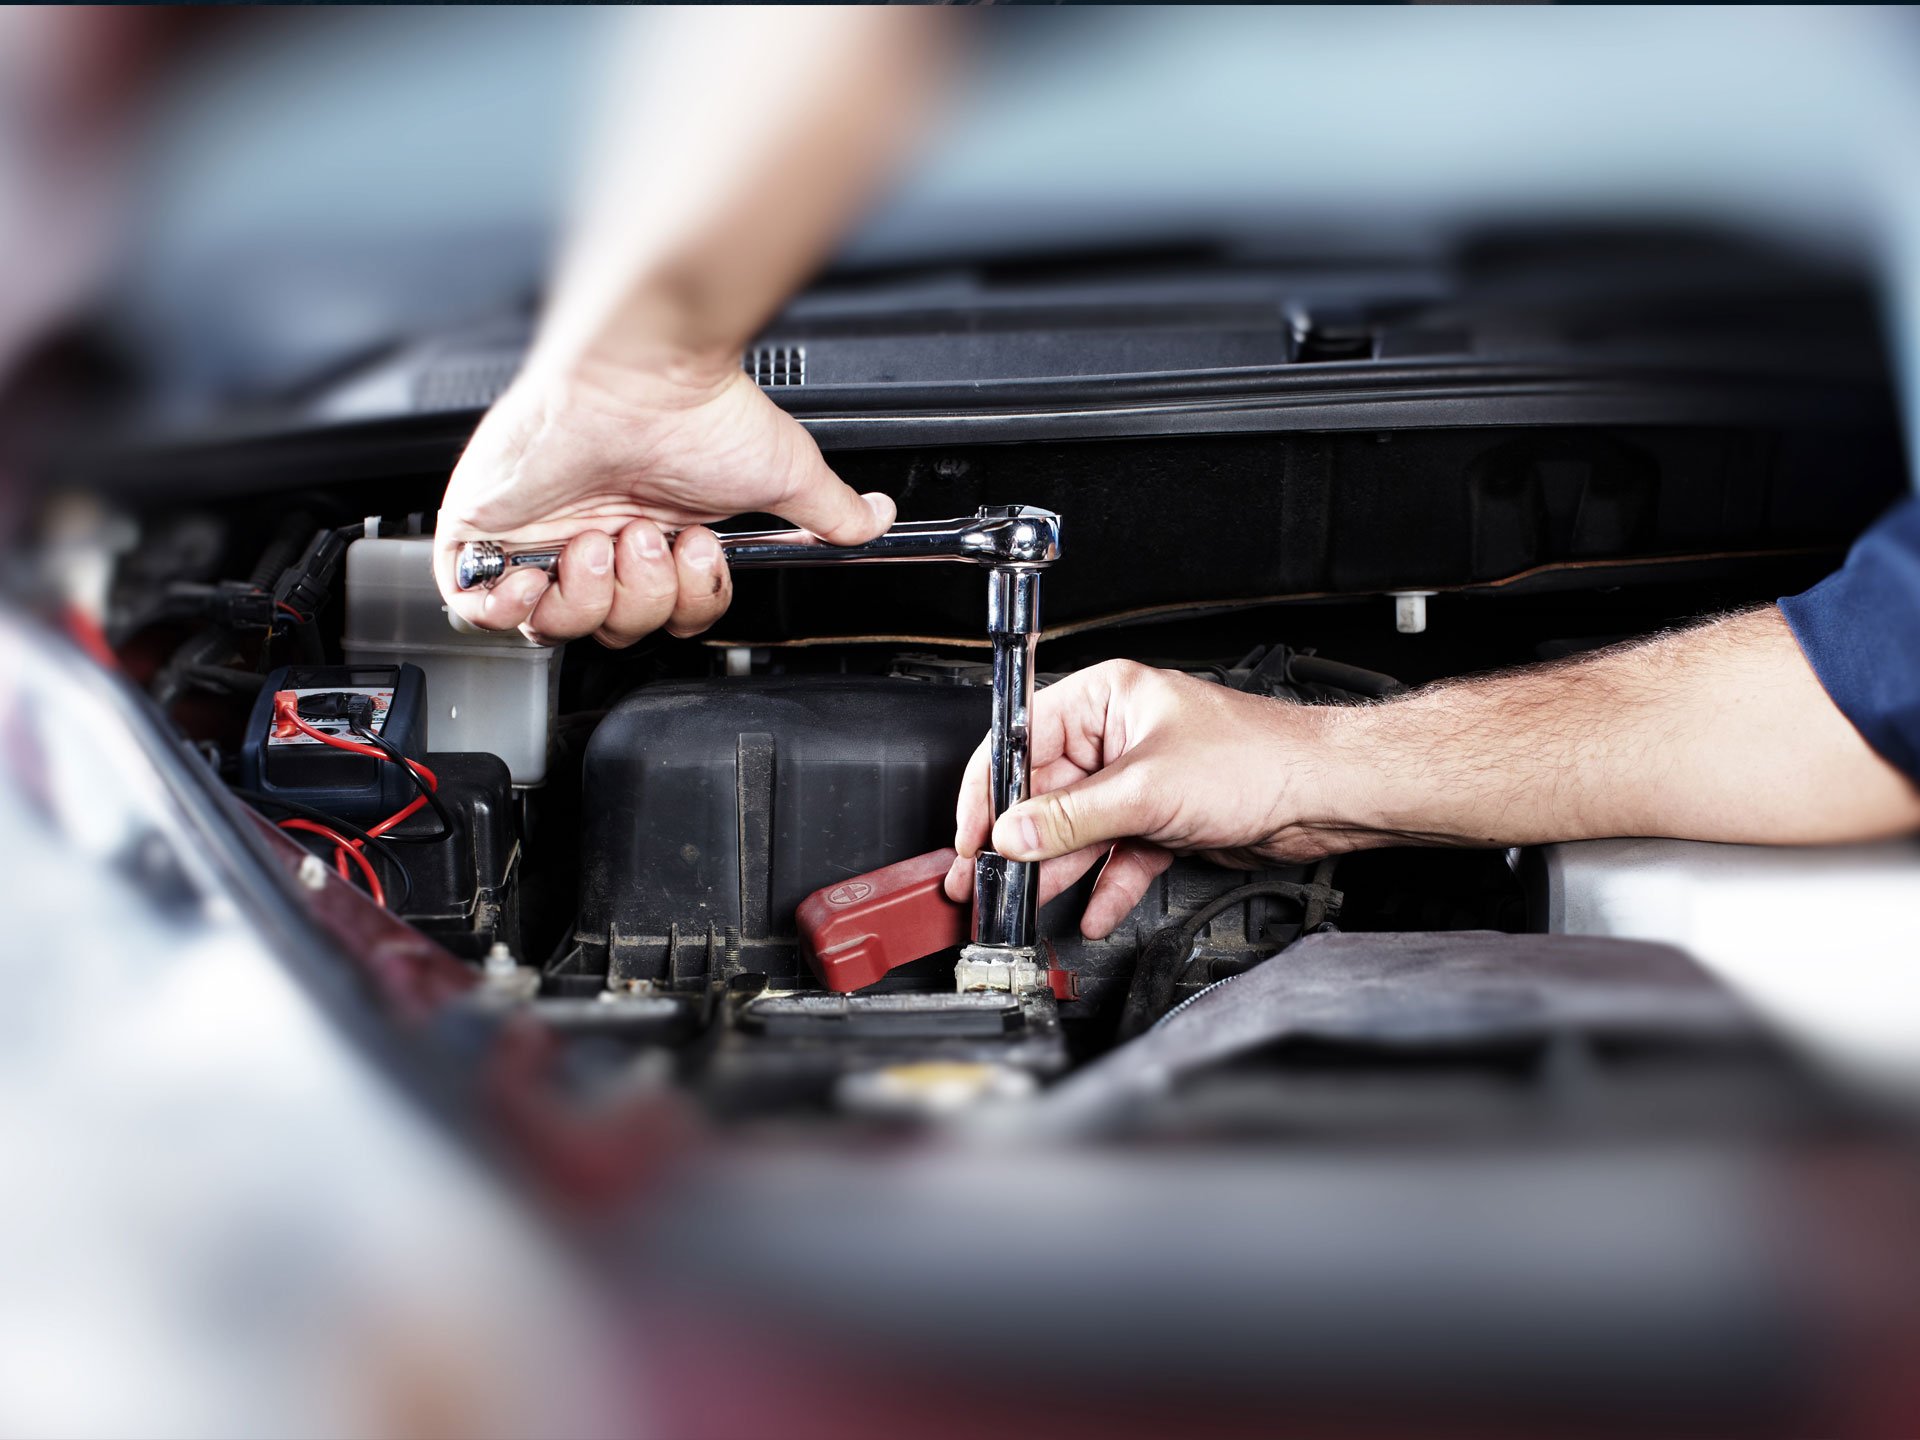 How does a car battery work and how is it constructed?